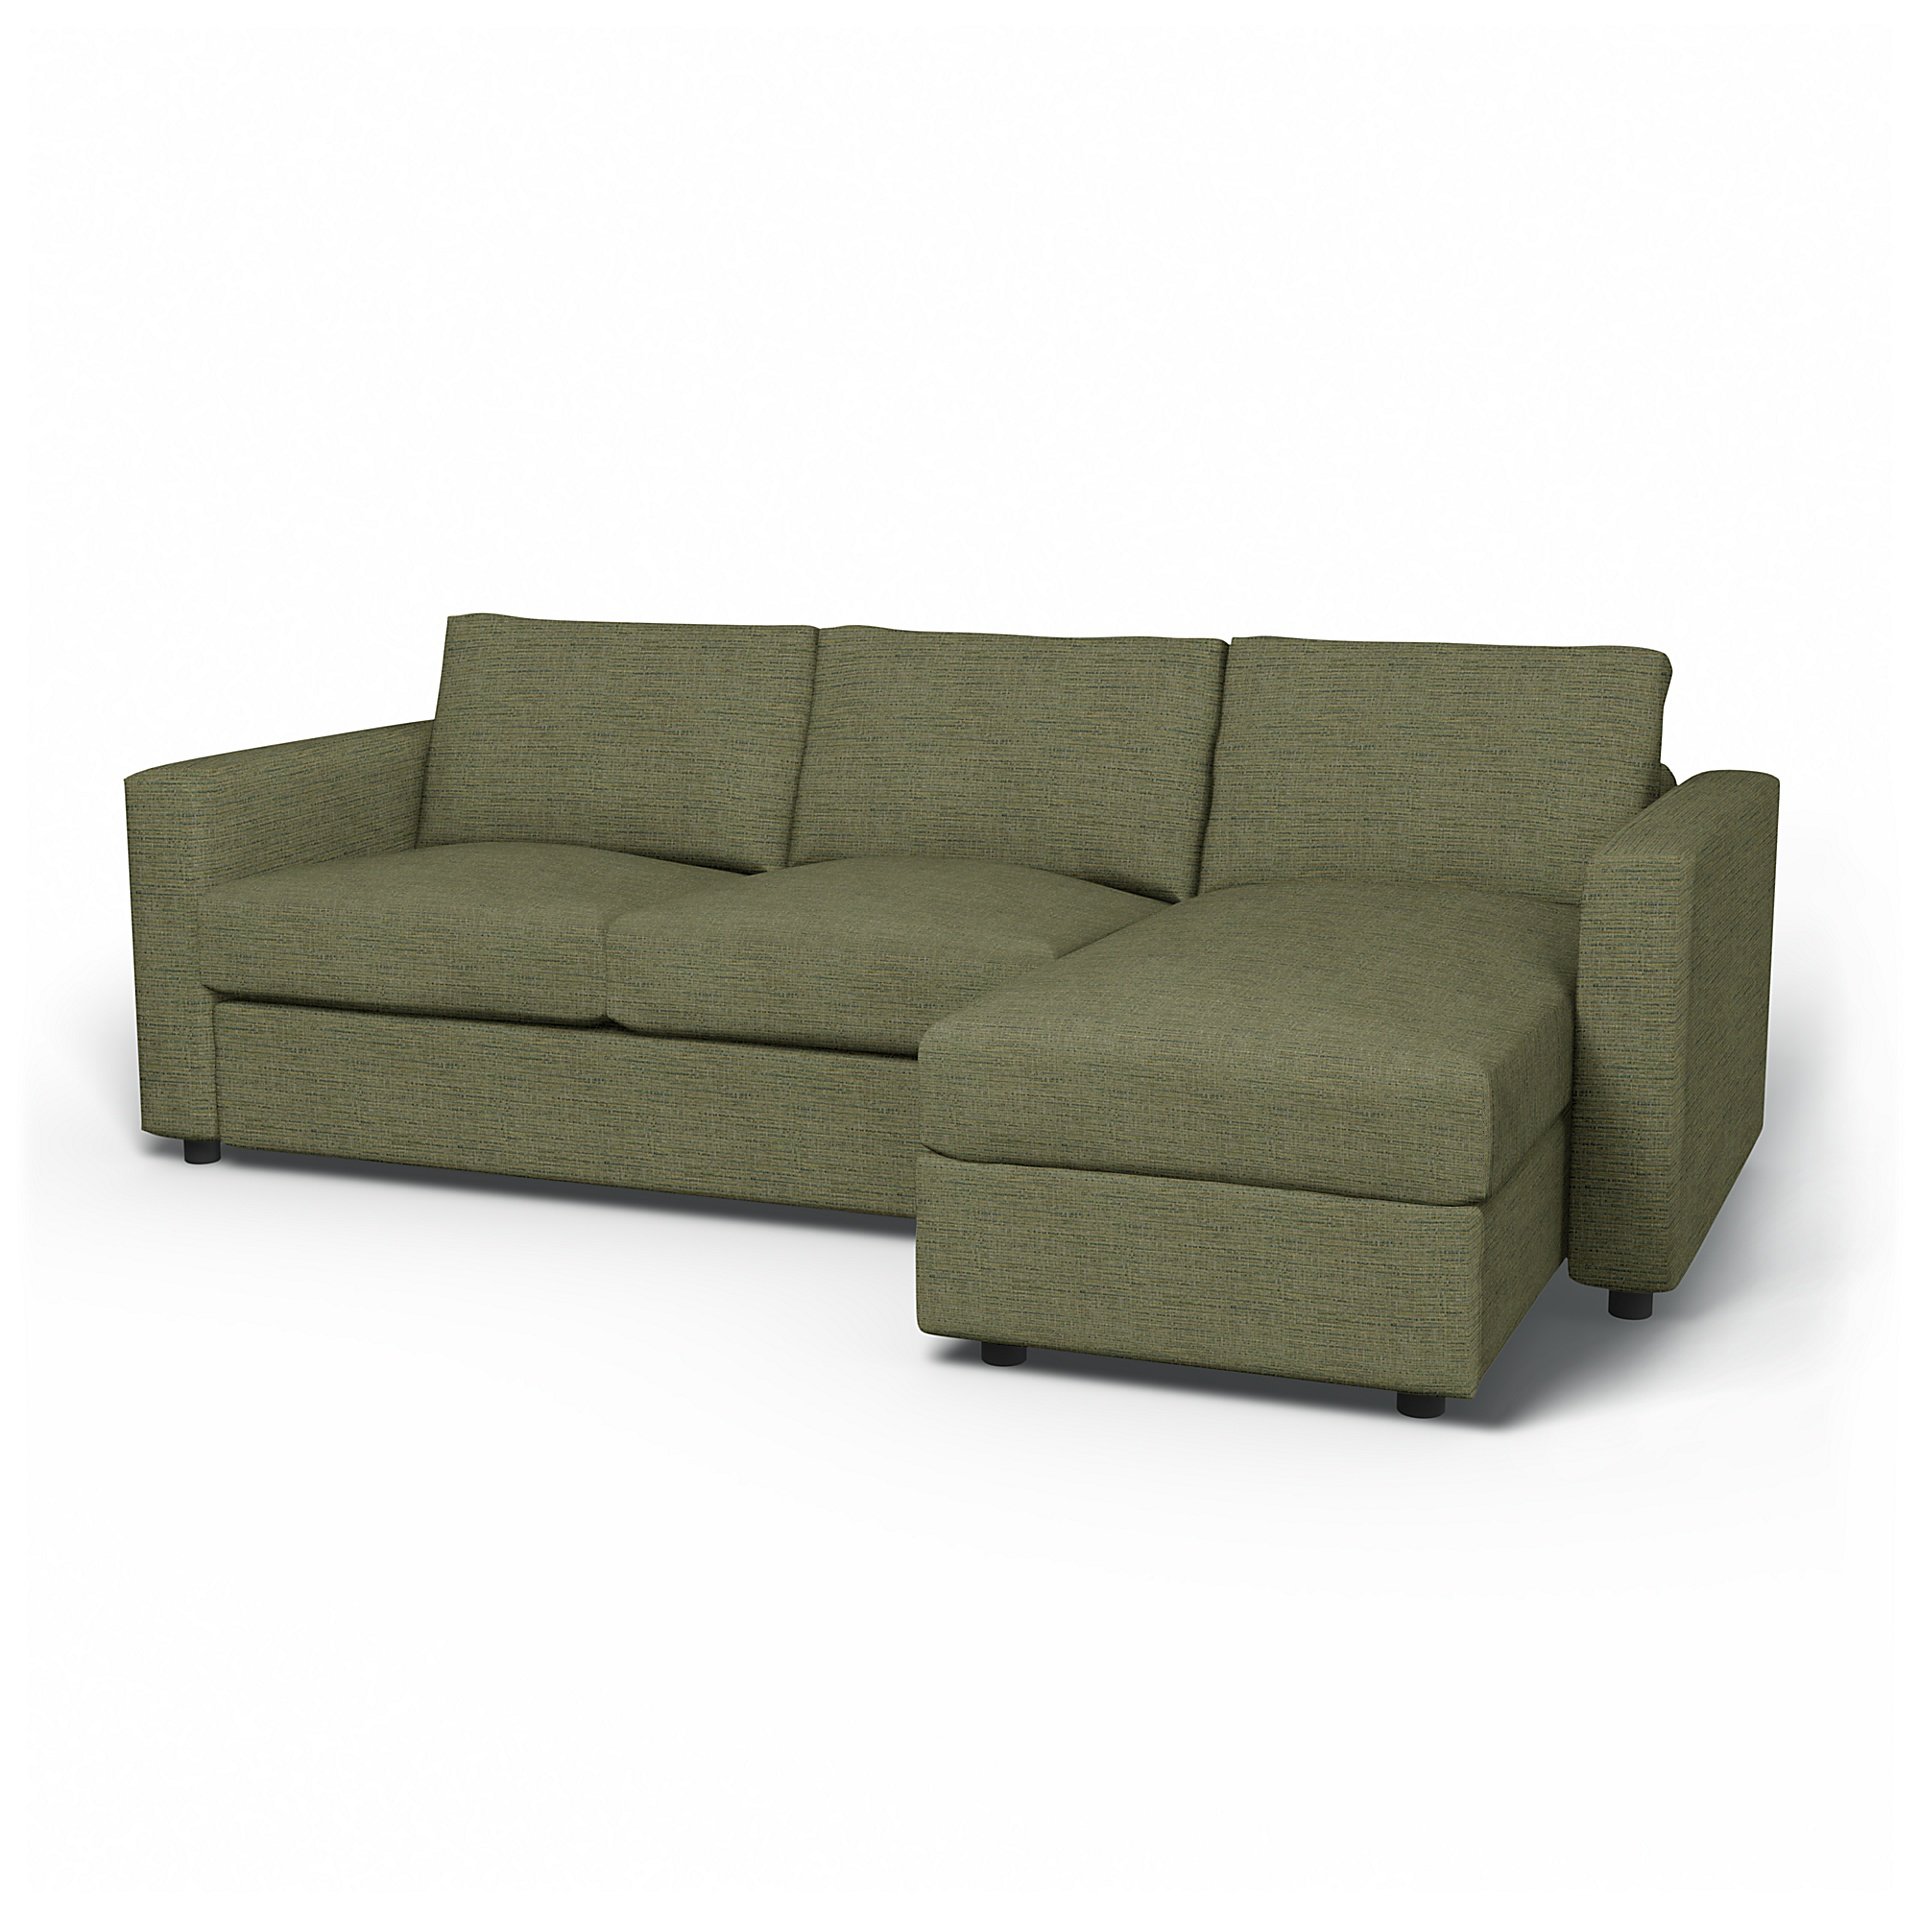 IKEA - Vimle 2 Seater Sofa with Chaise Cover, Meadow Green, Boucle & Texture - Bemz